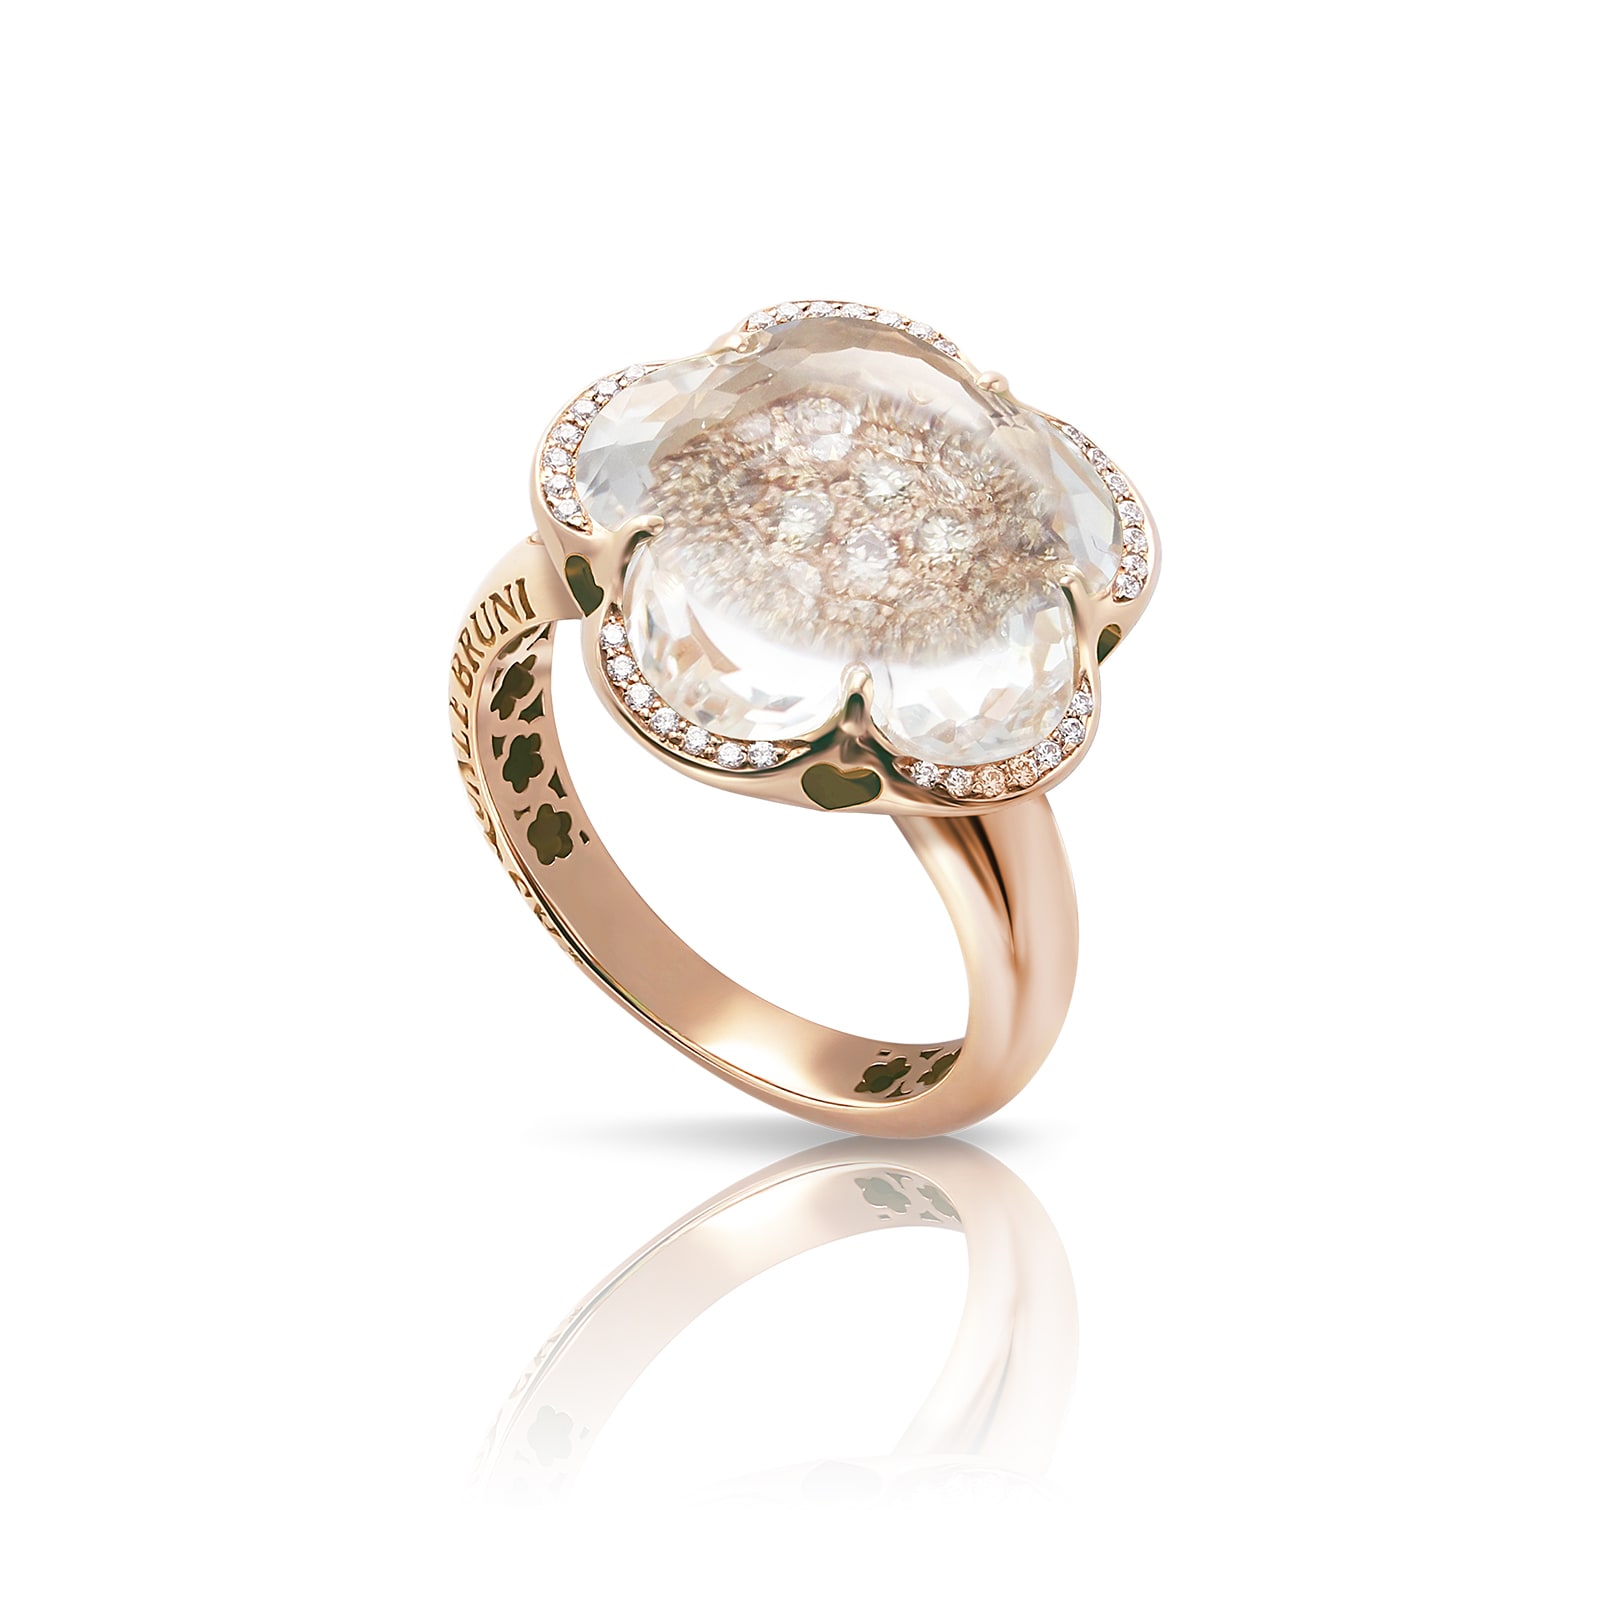 Bon Ton Ring in 18ct Rose Gold with Rock Crystal, White and Champagne Diamonds - Ring Size O